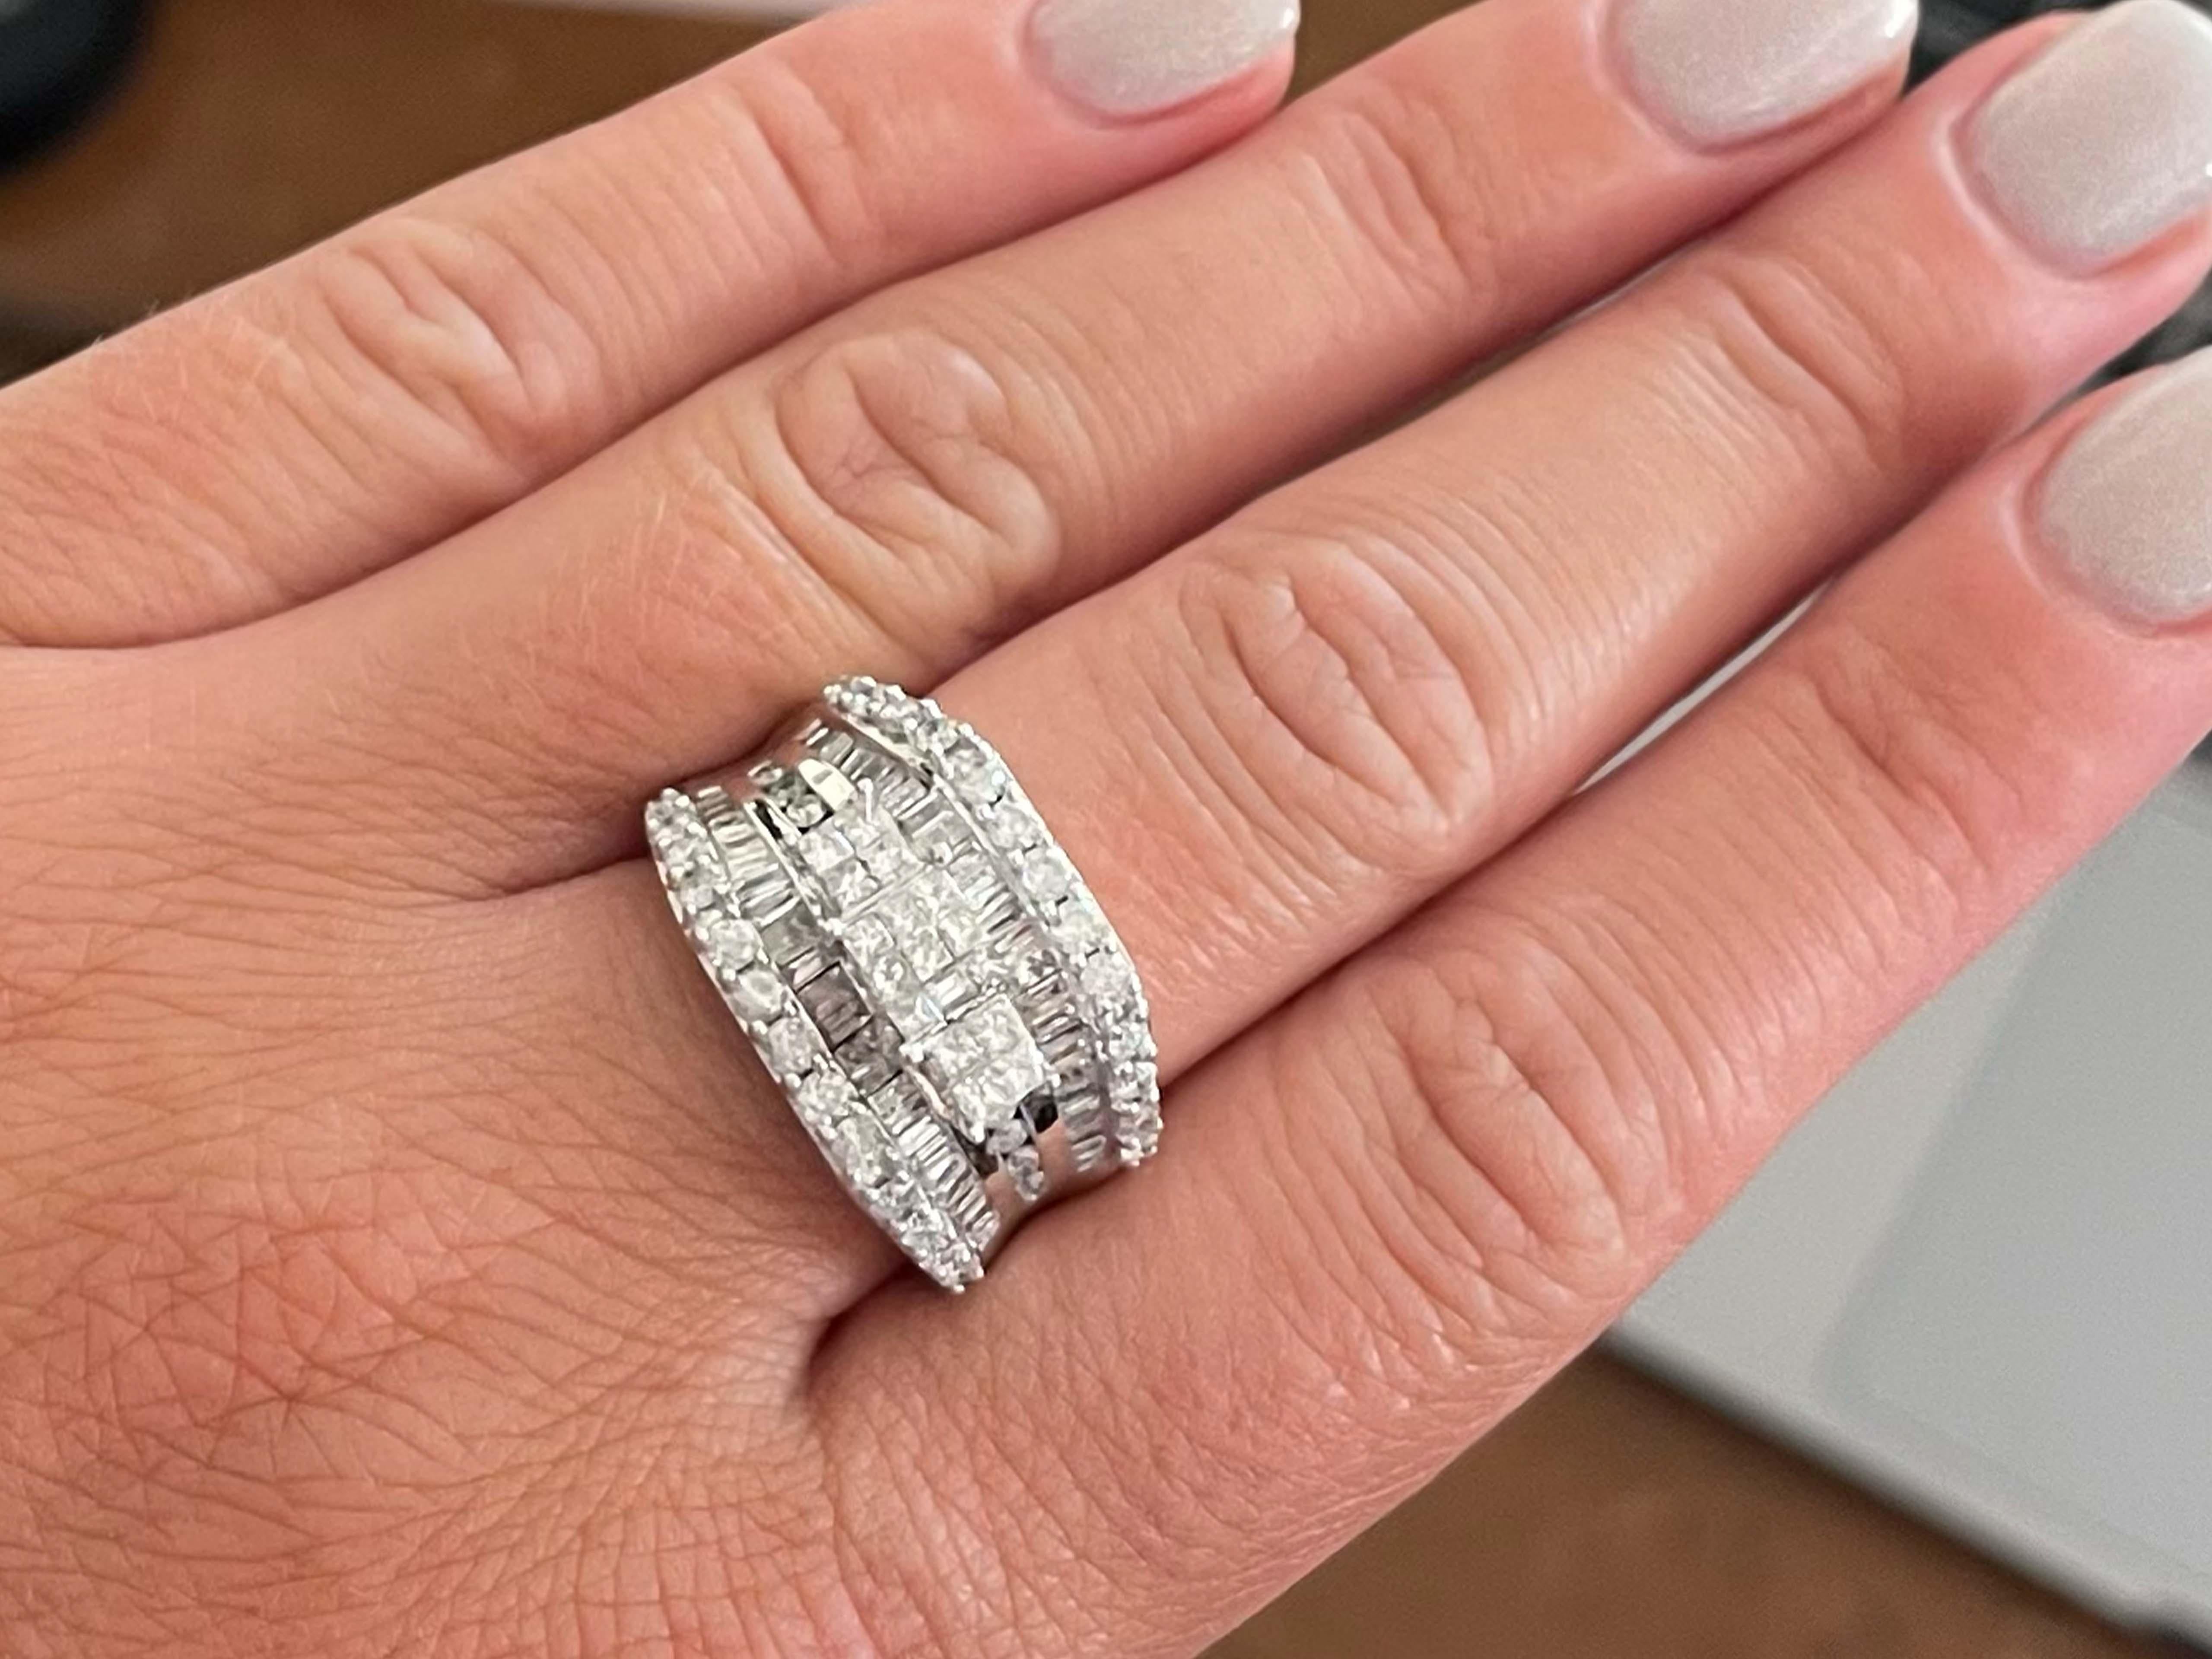 Item Specifications:

Metal: 14k White Gold

Diamond Count: 104 diamonds

Diamond Carat Weight: 2.66

Diamond Color: G

Diamond Clarity: SI1-I1

Ring Width: 14.46 mm

Ring Size: 8 (resizable)

Total Weight: 11.5 Grams

Stamped: 